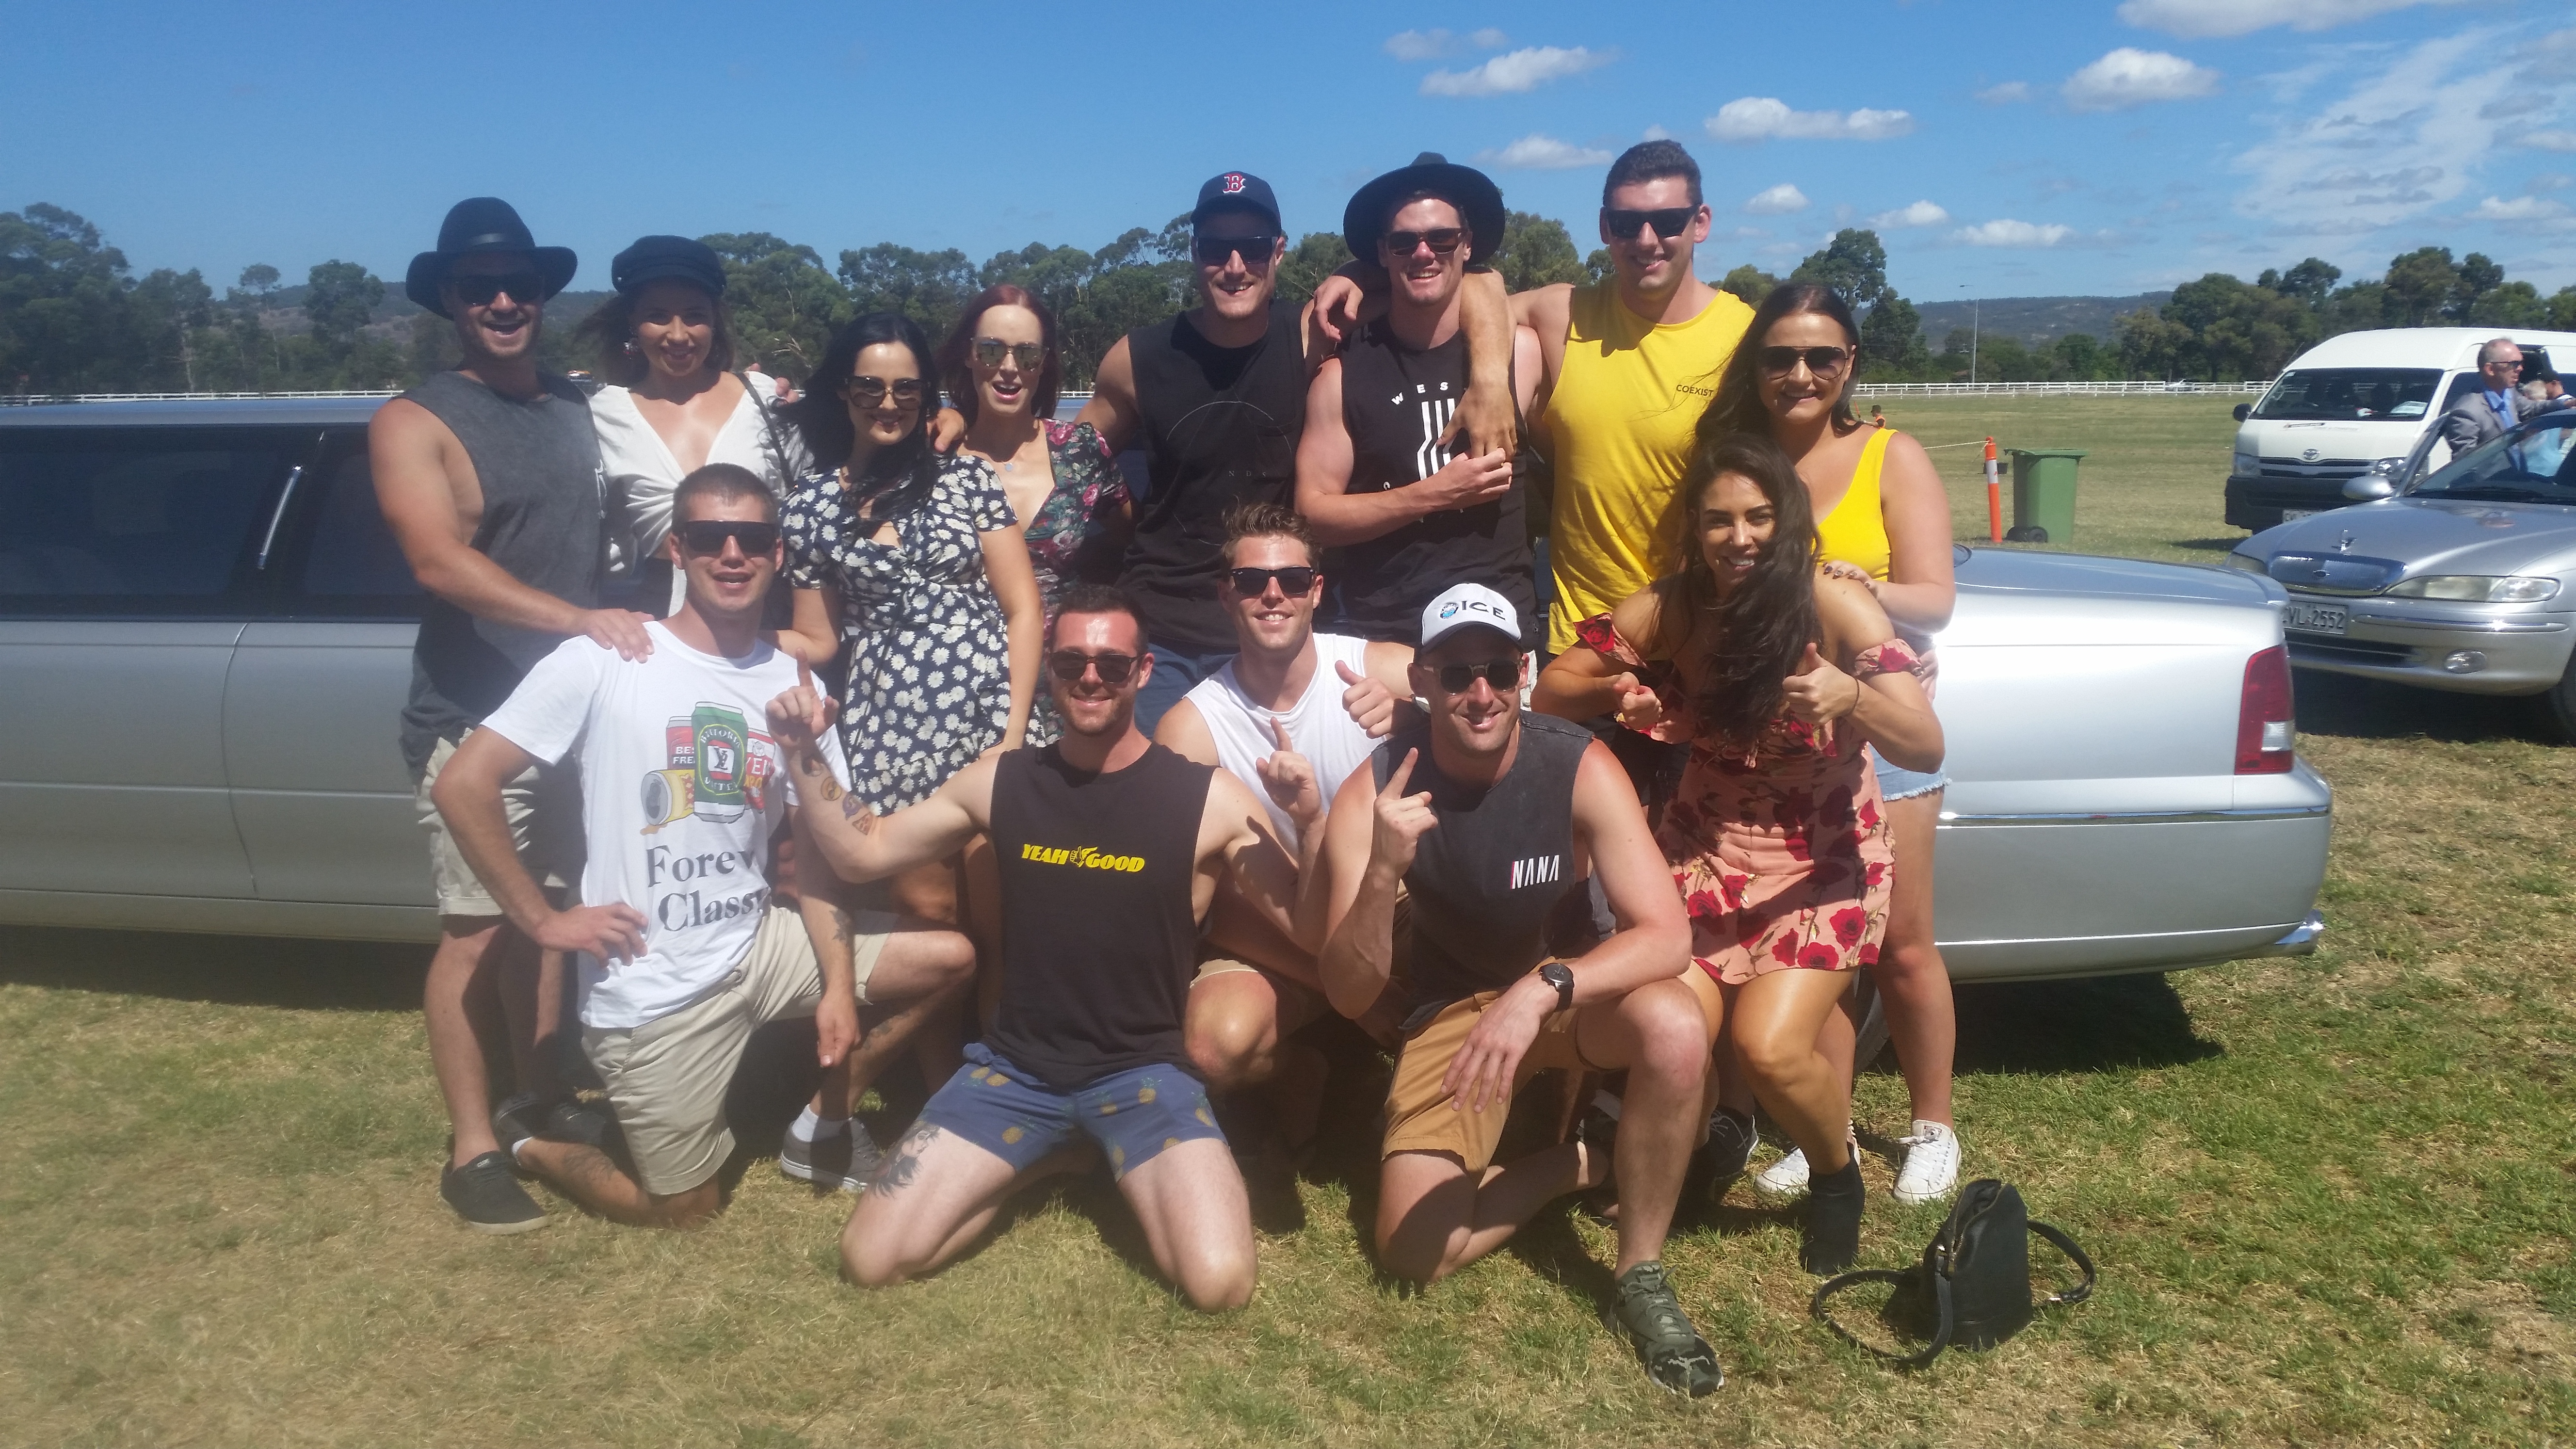 Limo Hire Perth helped to deliver and retrieve these excited and respectful young guests to and from Belvoir Amphitheatre where they "grooved"to their strange music and dance rituals